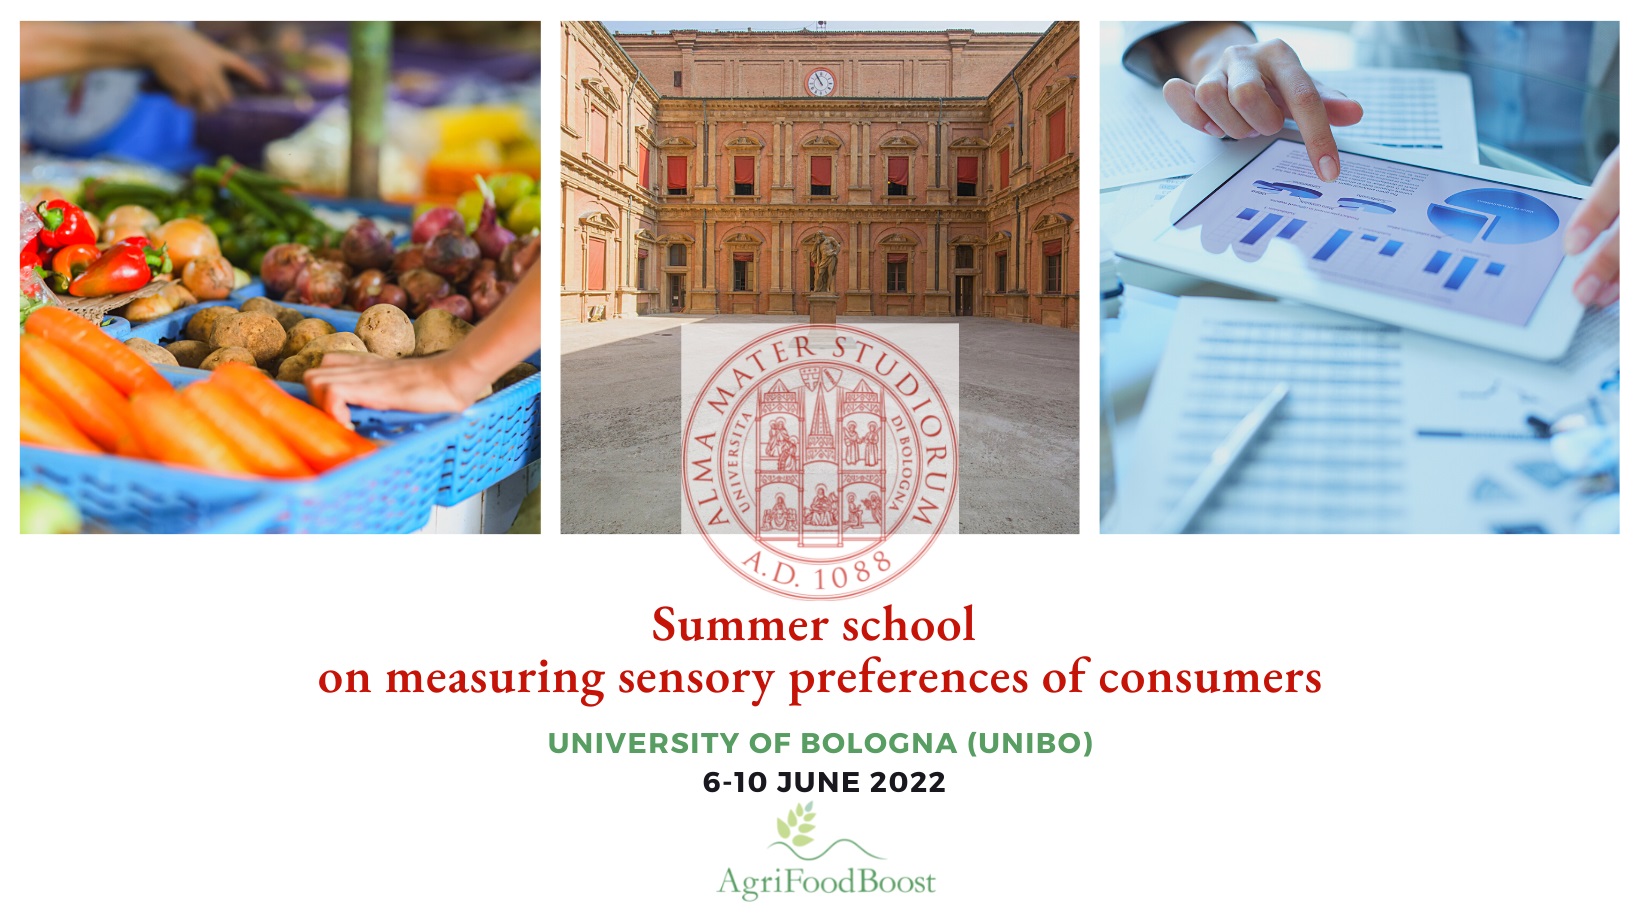 Summer school on measuring sensory preferences of consumers